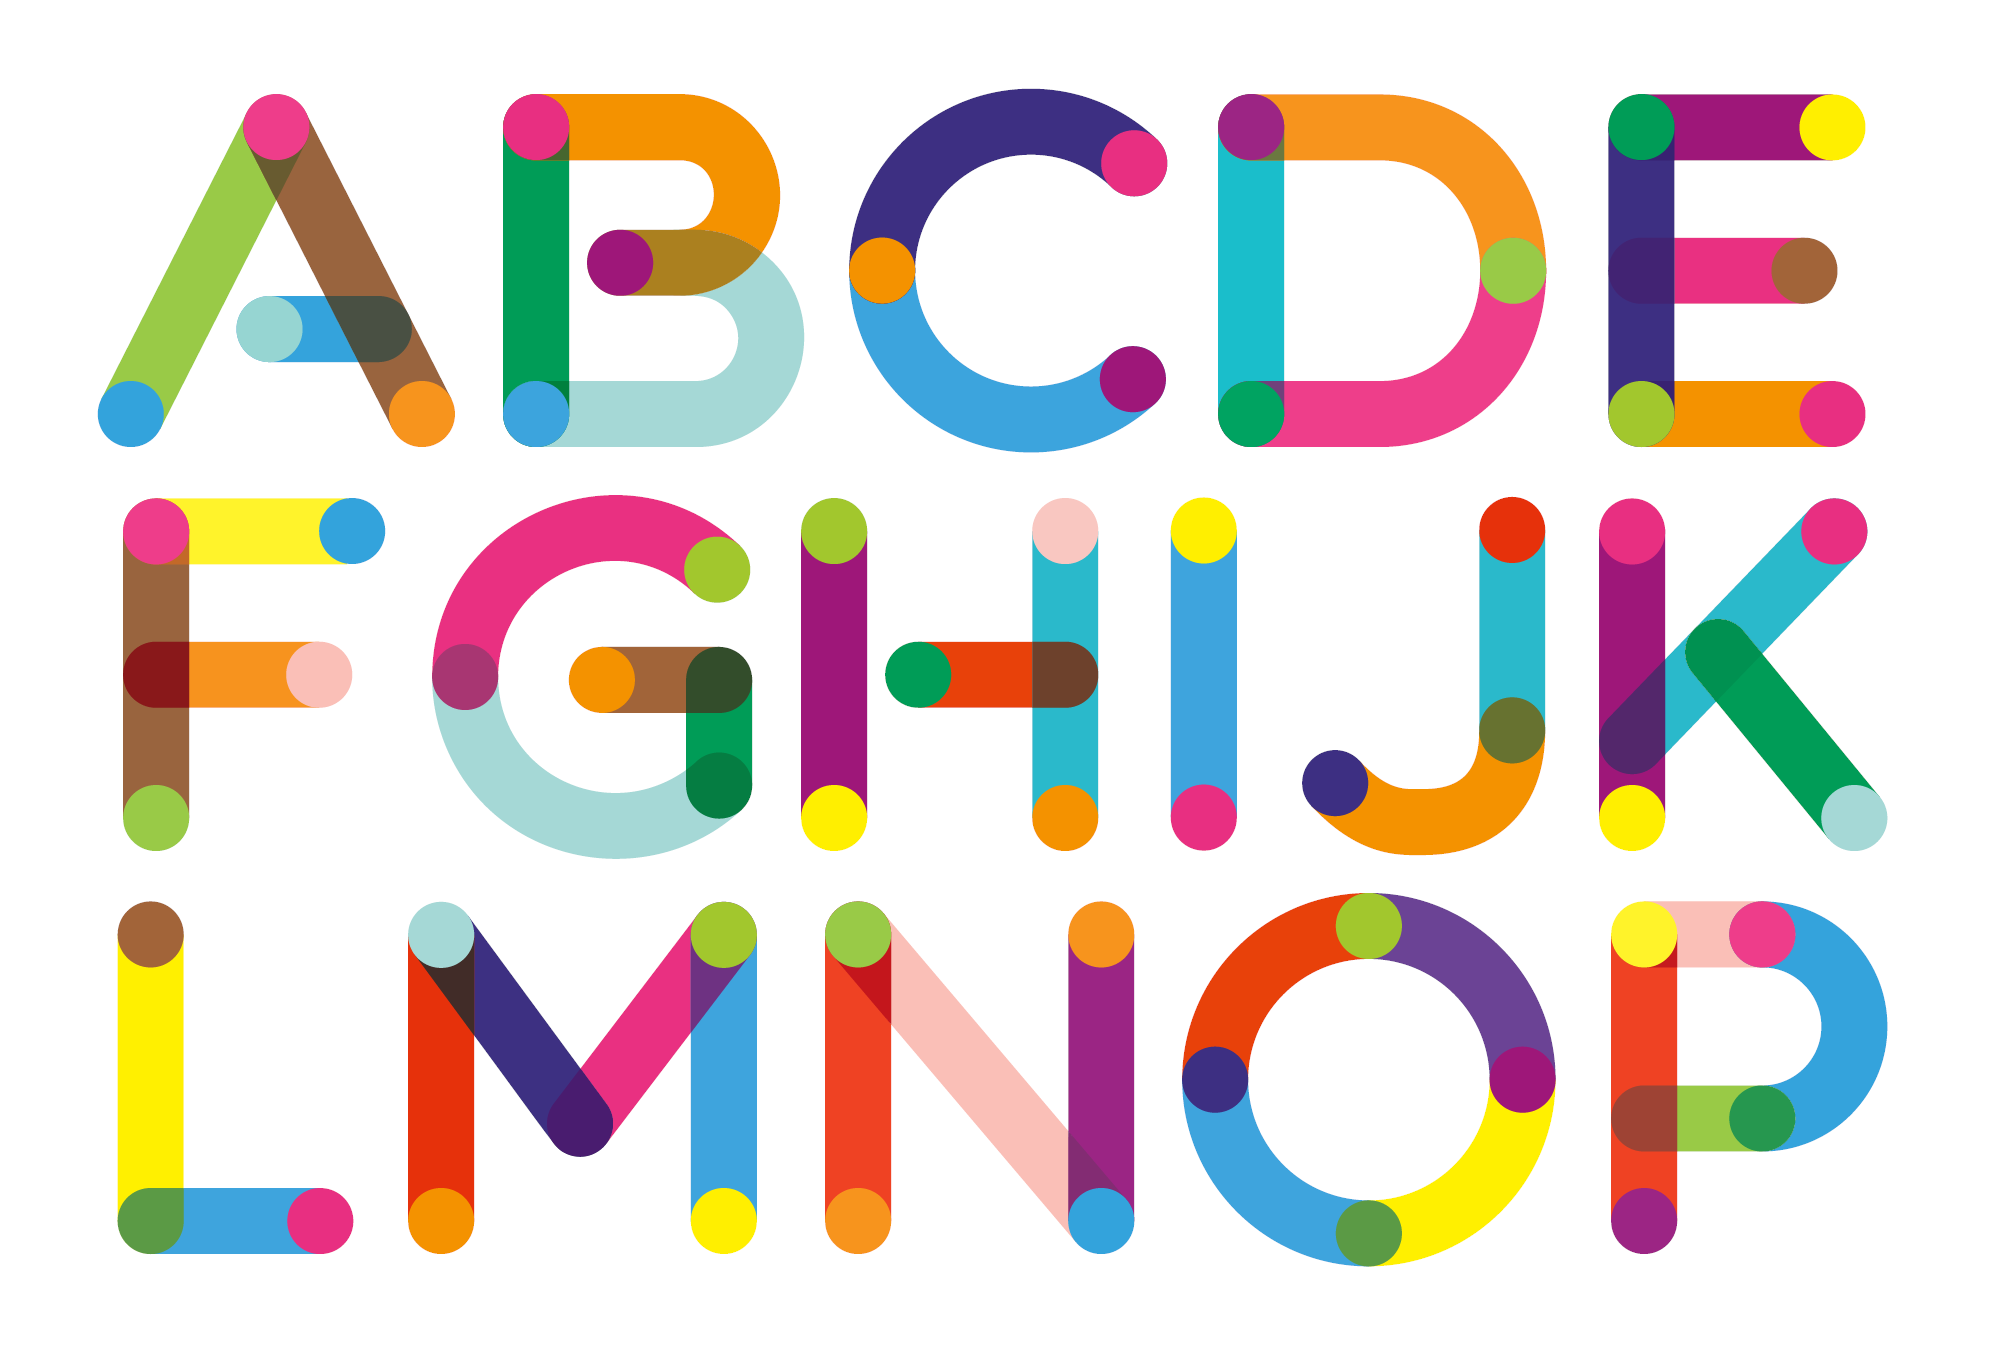 The alphabet, written out in bold, colorful text against a white background.